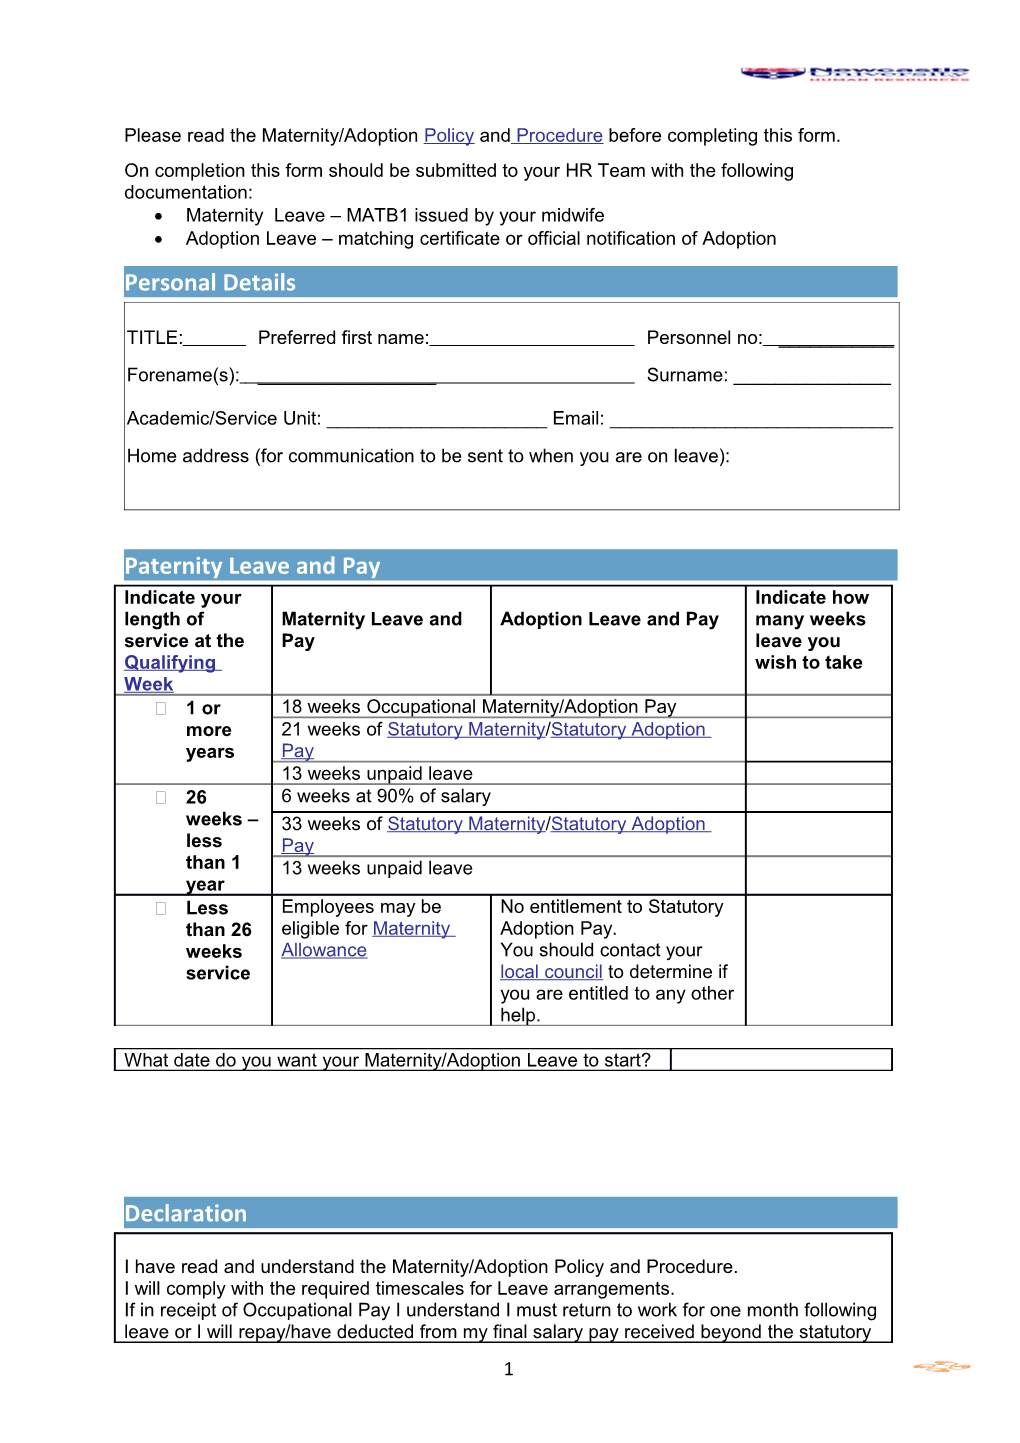 On Completion This Form Should Be Submitted to Your HR Team with the Following Documentation